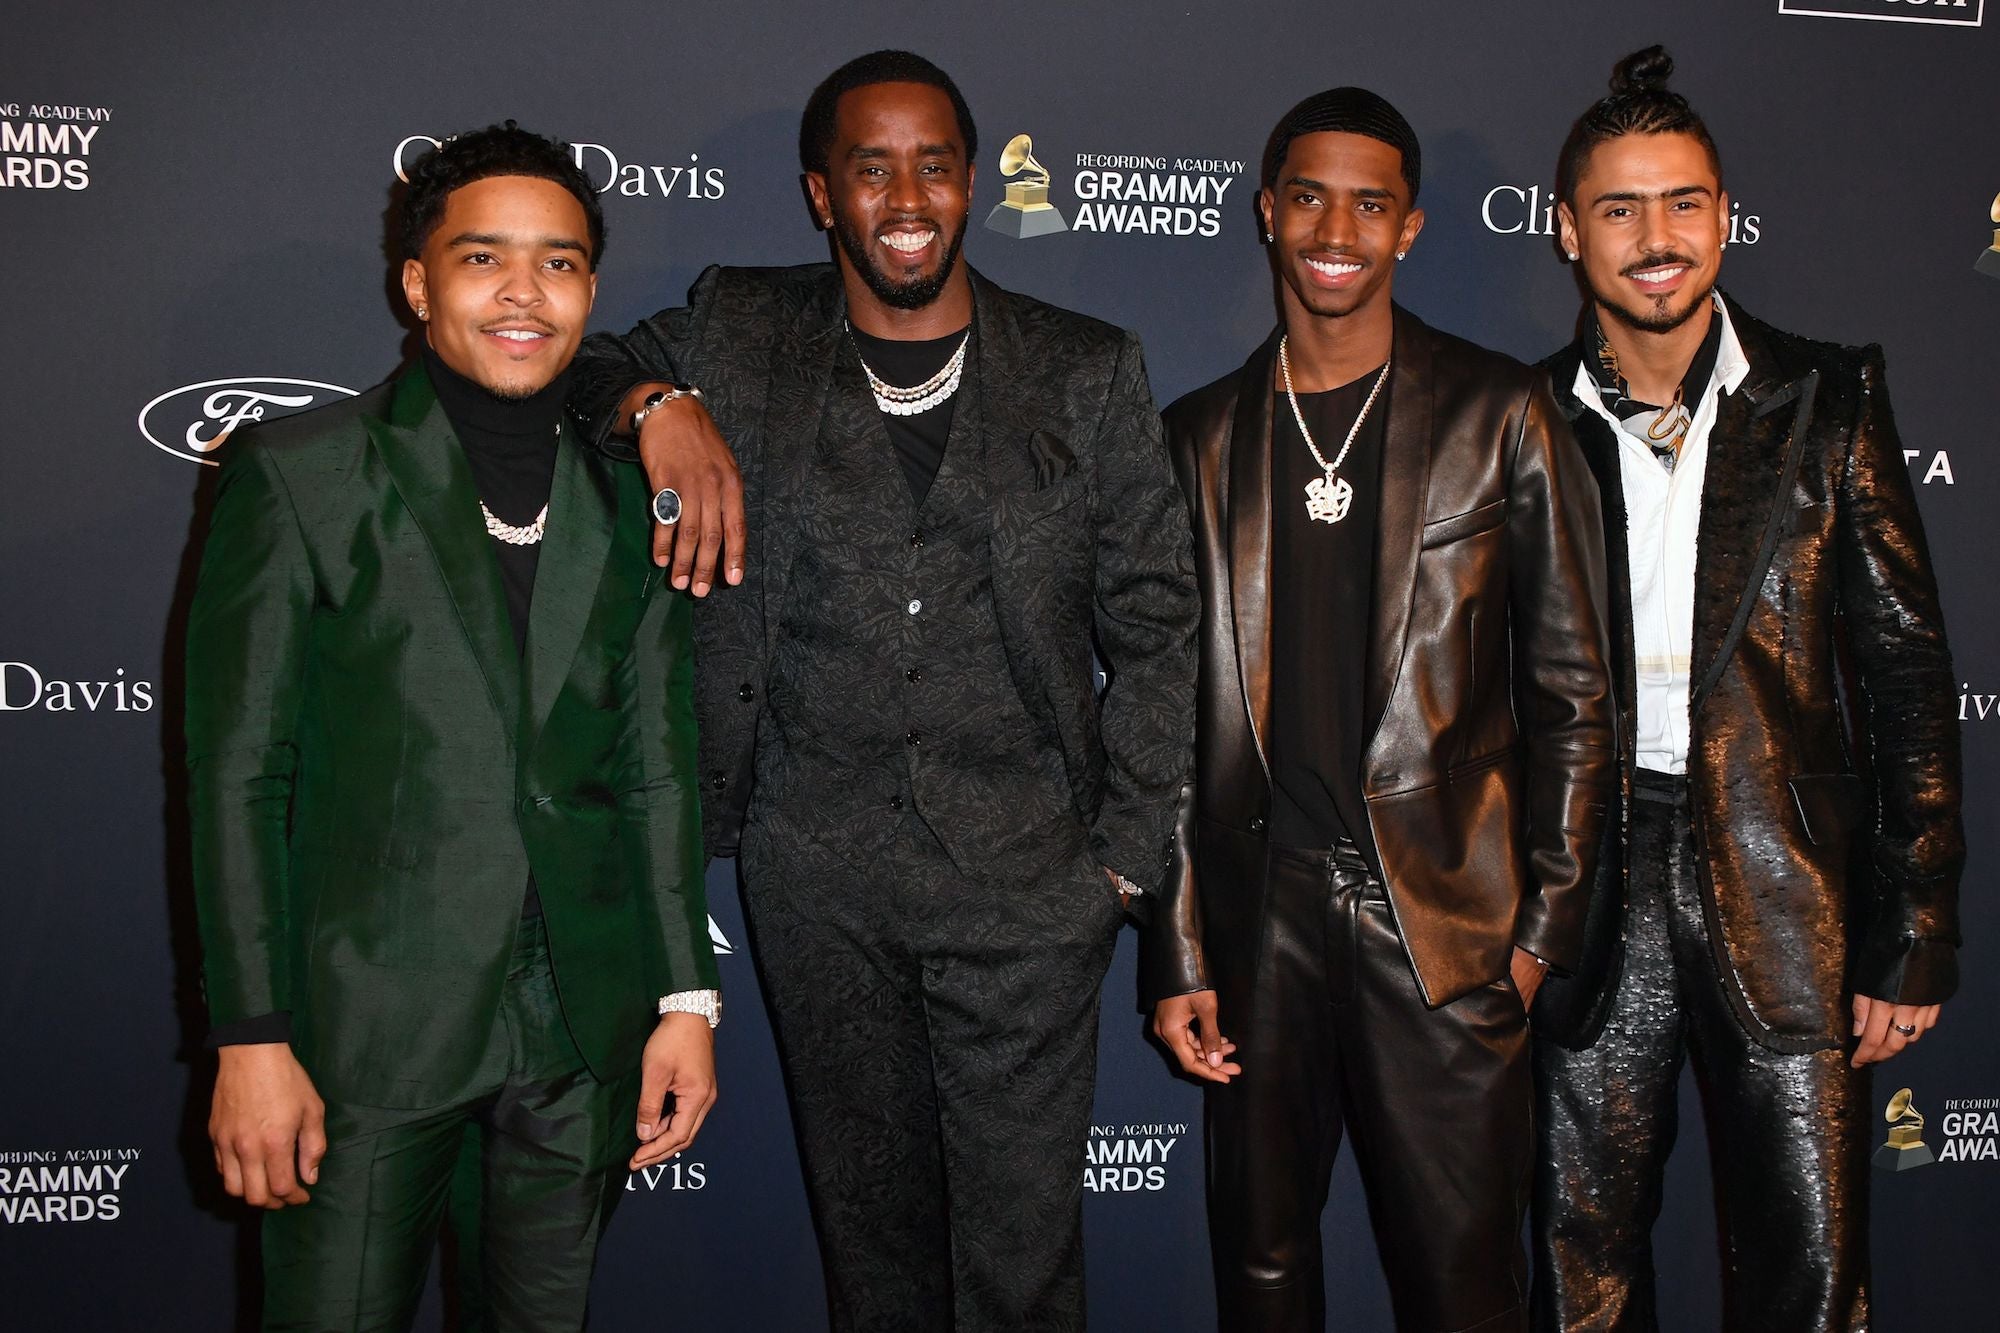 'Making The Band' Taps Diddy's Sons For Reboot And Announces Casting Tour Stops